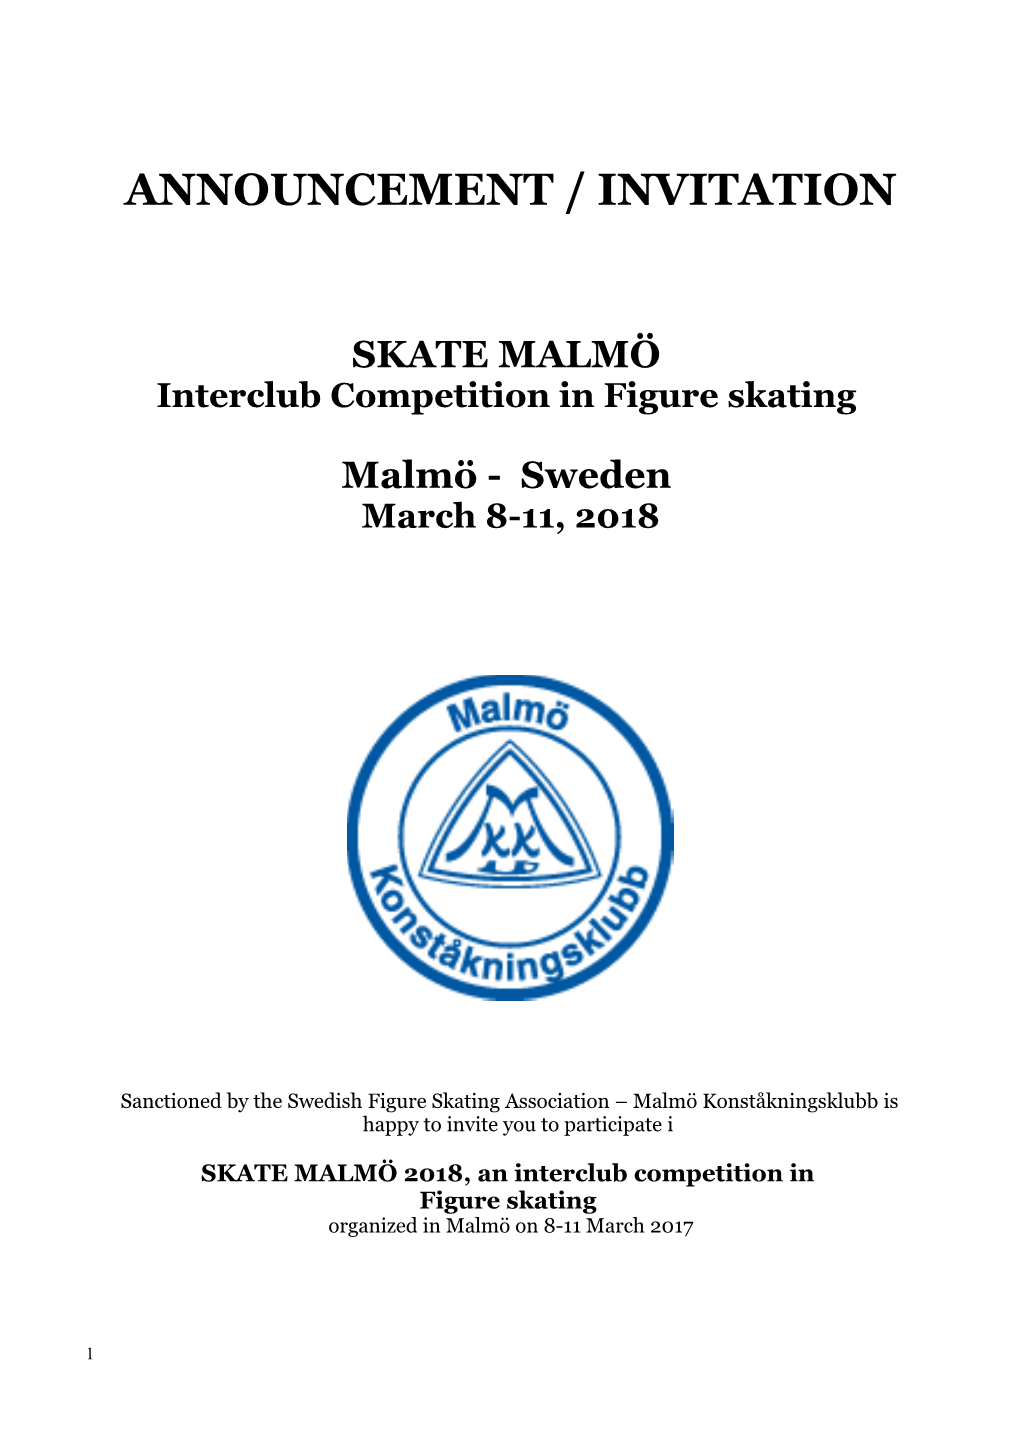 Interclub Competition in Figure Skating